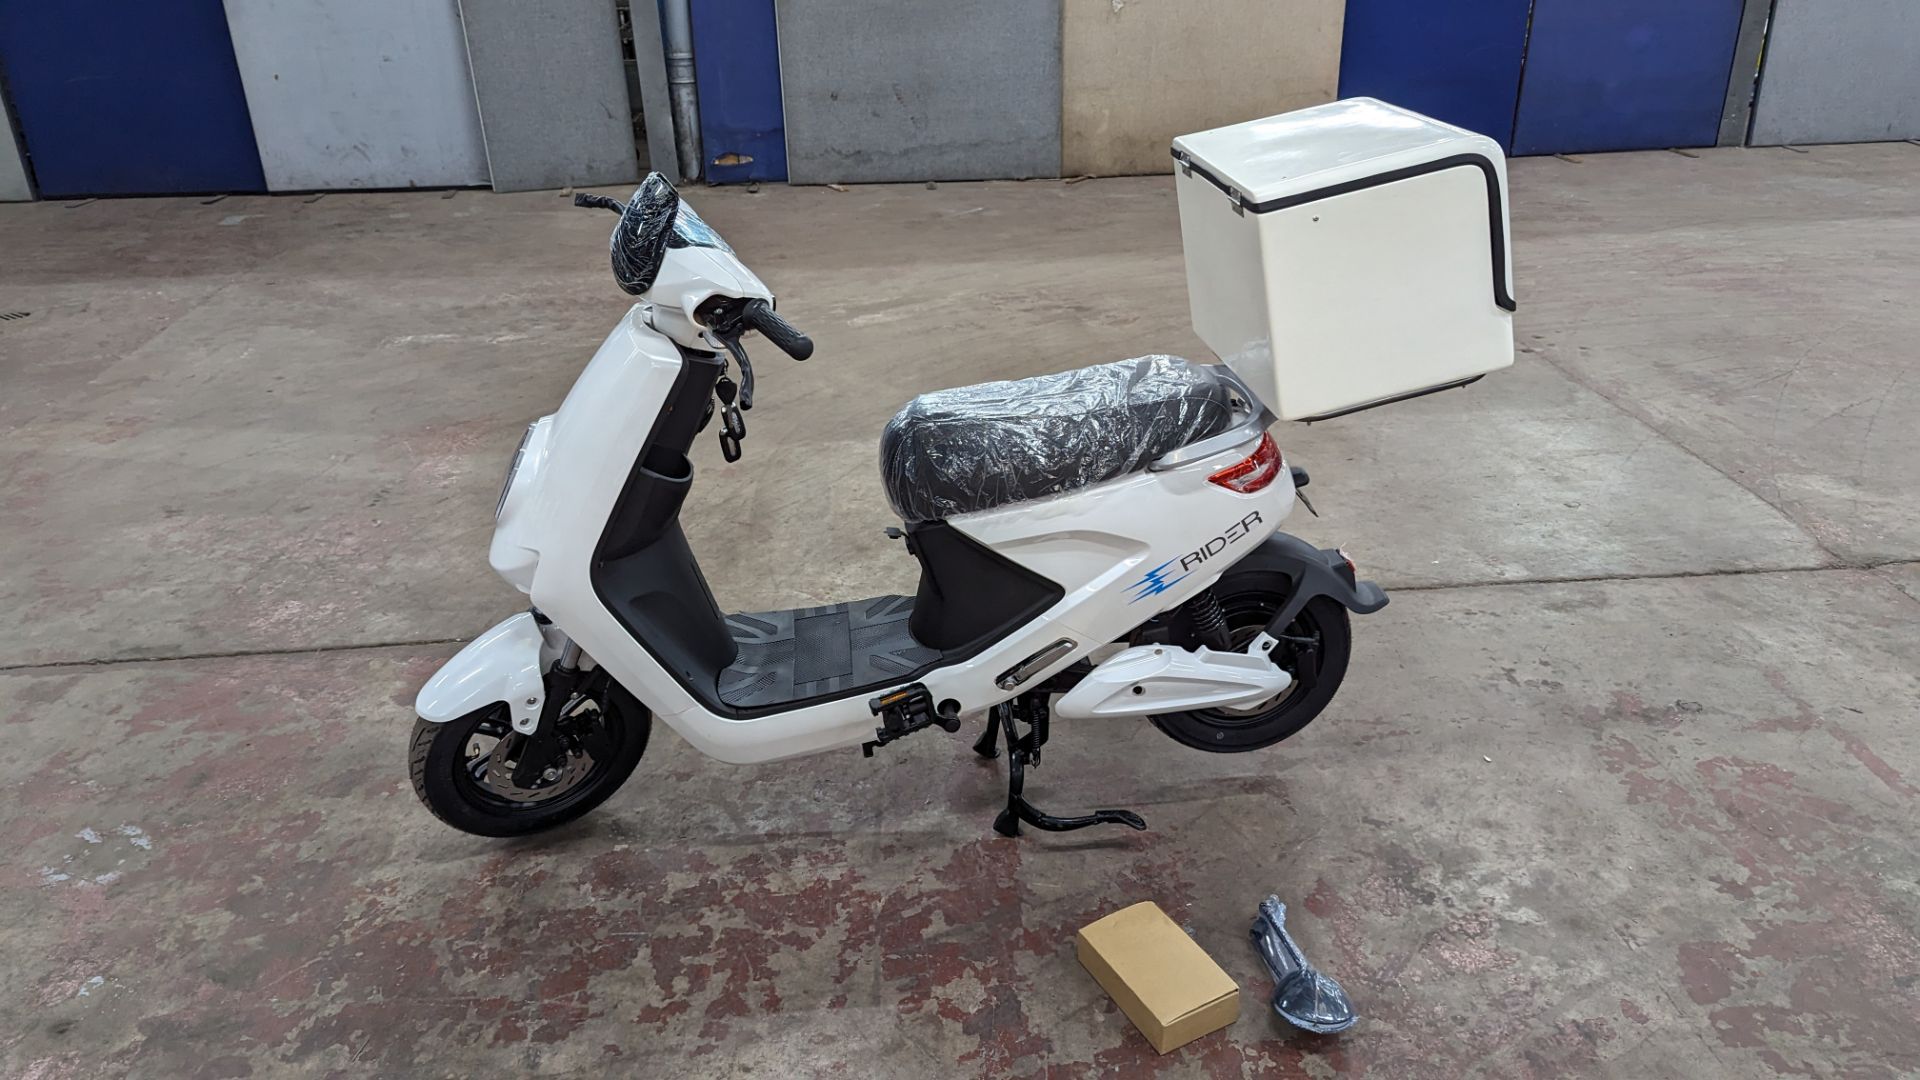 Model 18 Electric Bike: Zero (0) recorded miles, white body with black detailing, insulated box moun - Image 2 of 15